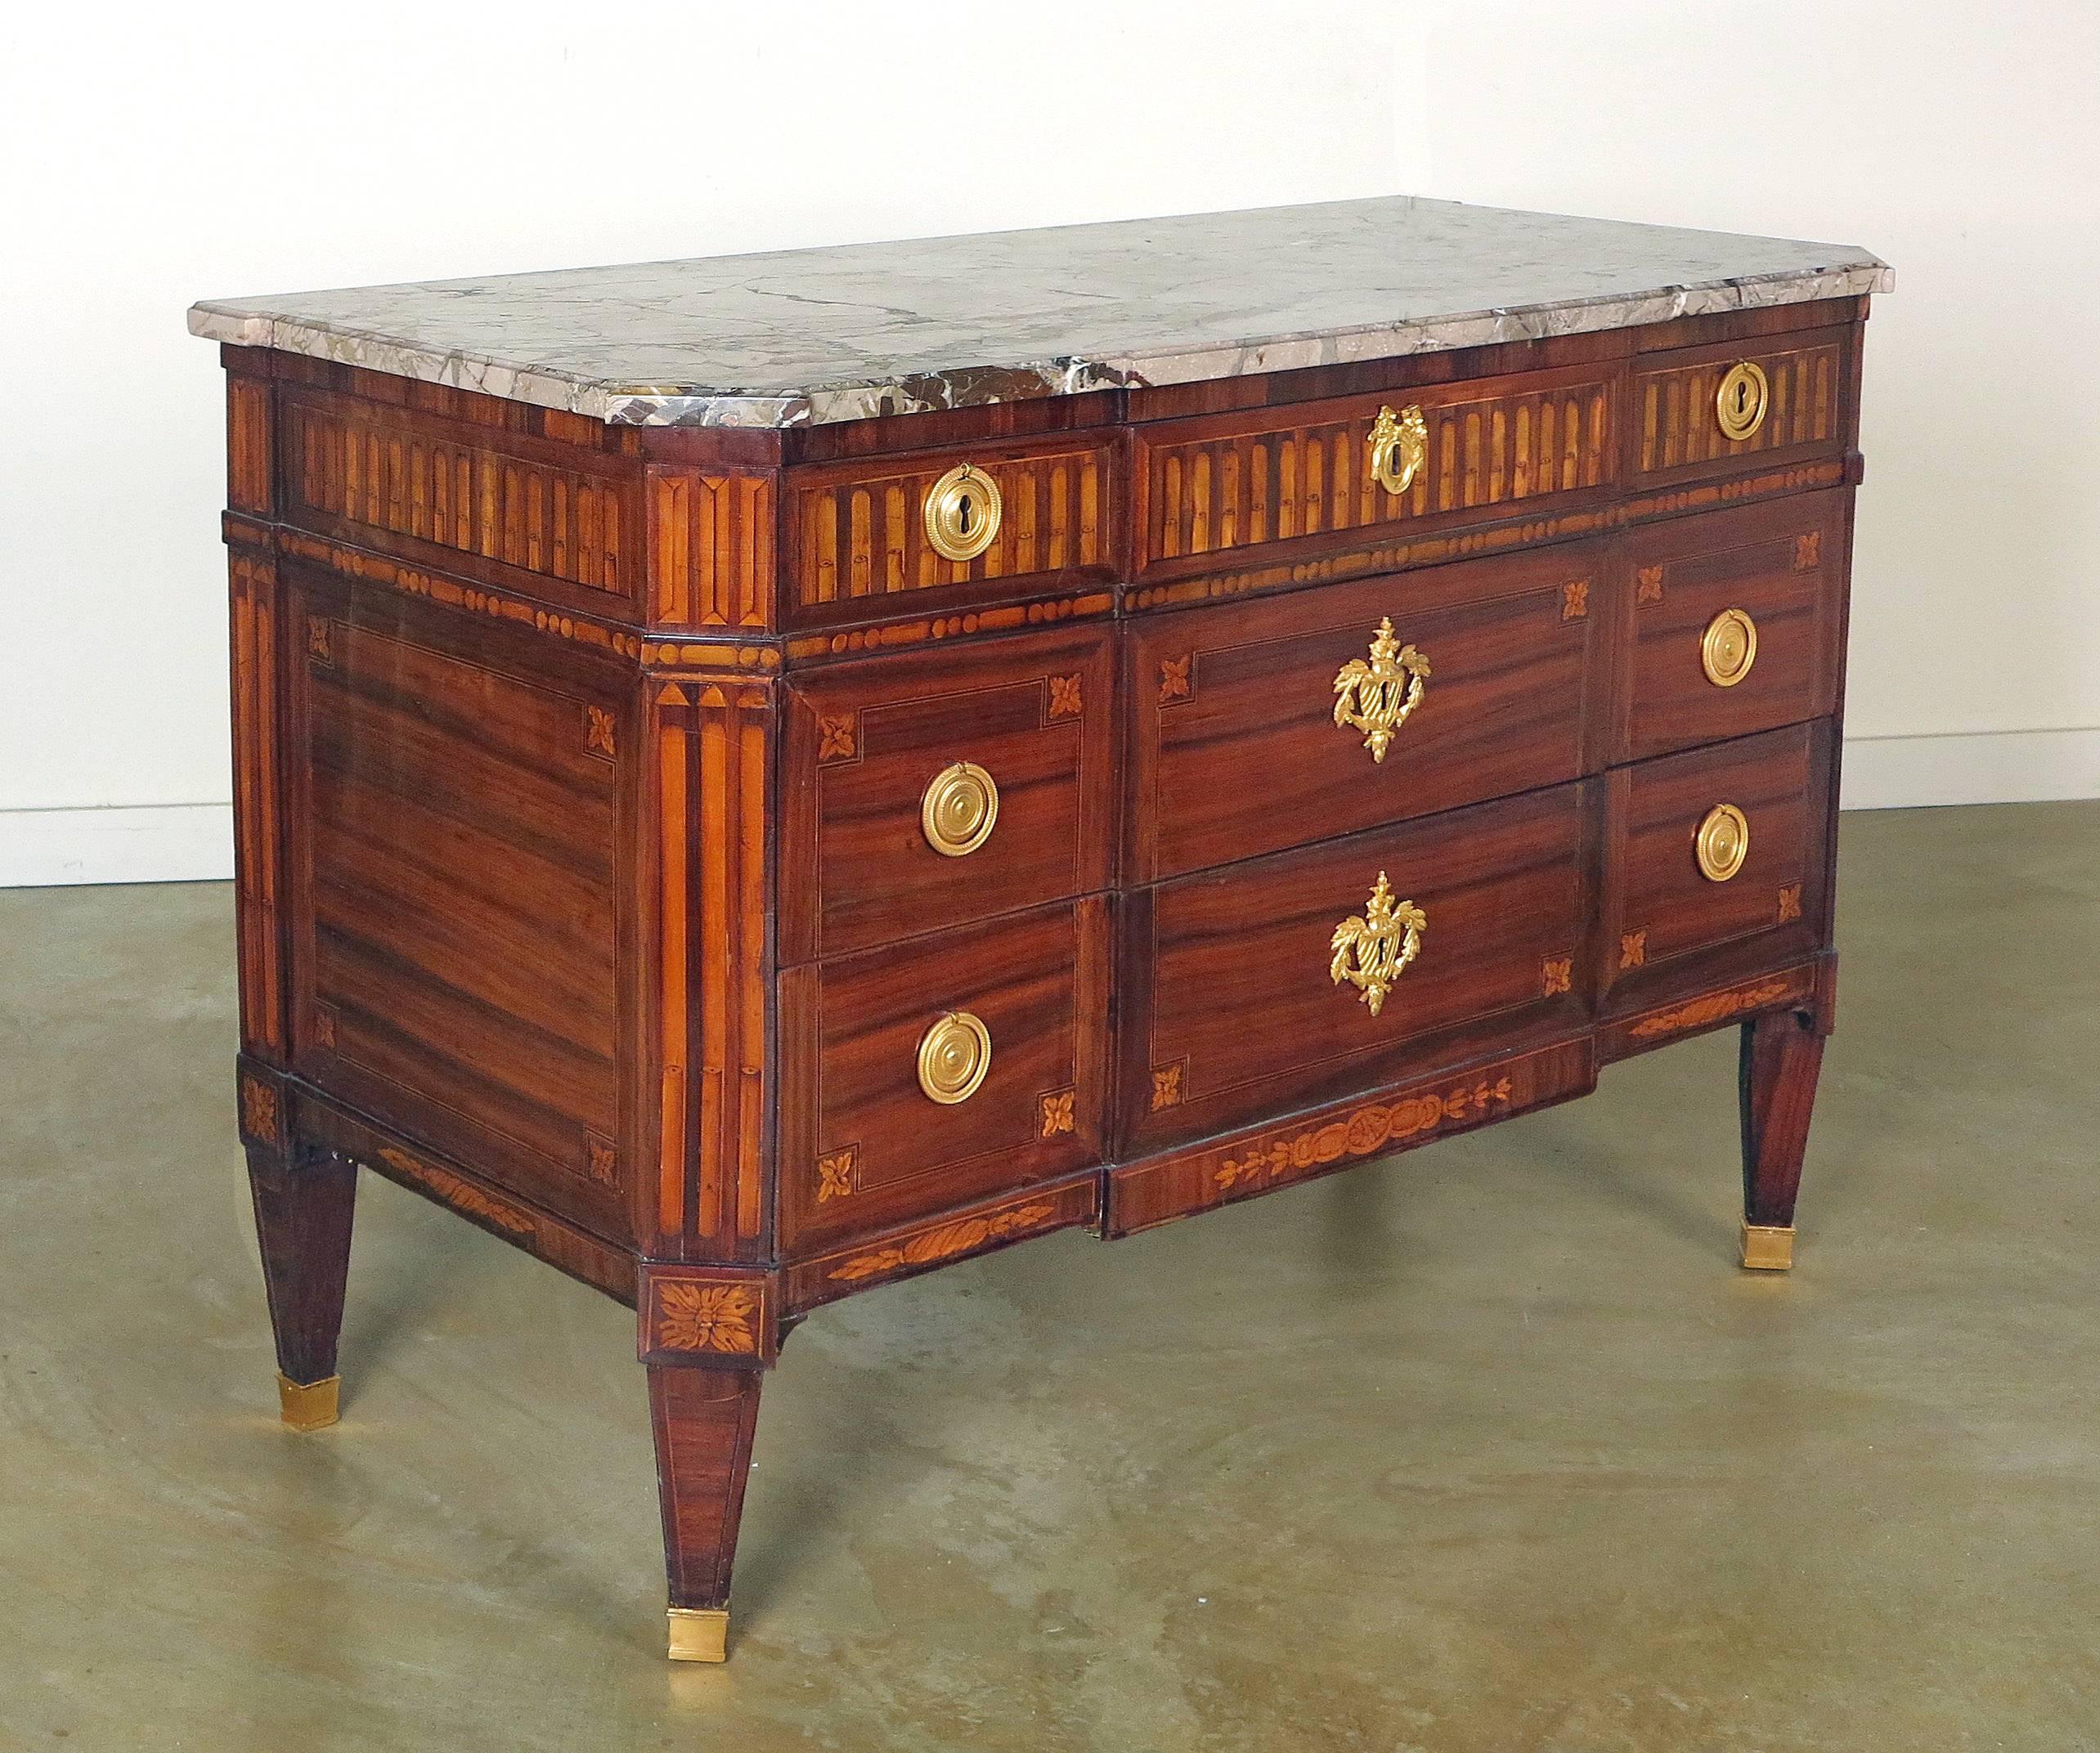 A Fine Louis XVI Kingwood with Tulipwood 
& Purplewood Inlaid Commode
18th Century
Stamped Crepi

Francois Crepi maitre 1778

Reference:
Similar Commode, Versailles 
Illustrated in “Le Mobilier Francais Du XVIII Siecle
Dictionnaire des